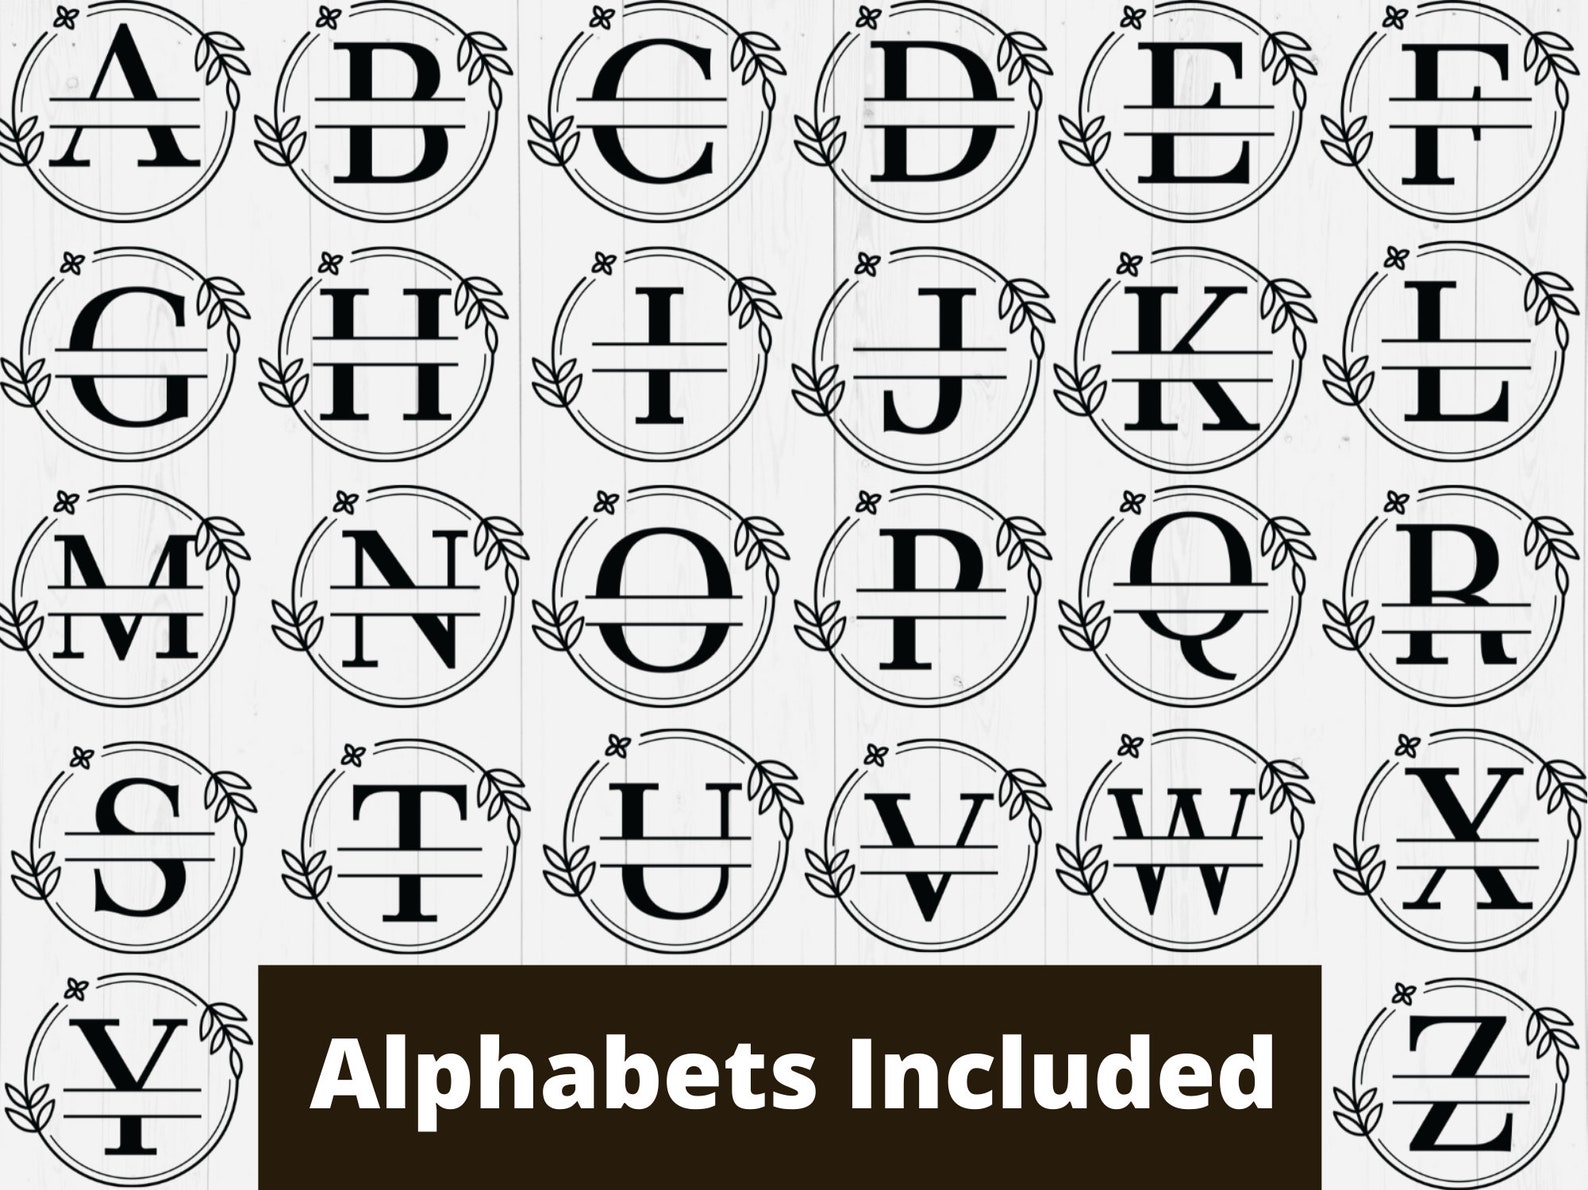 Collection includes alphabets.